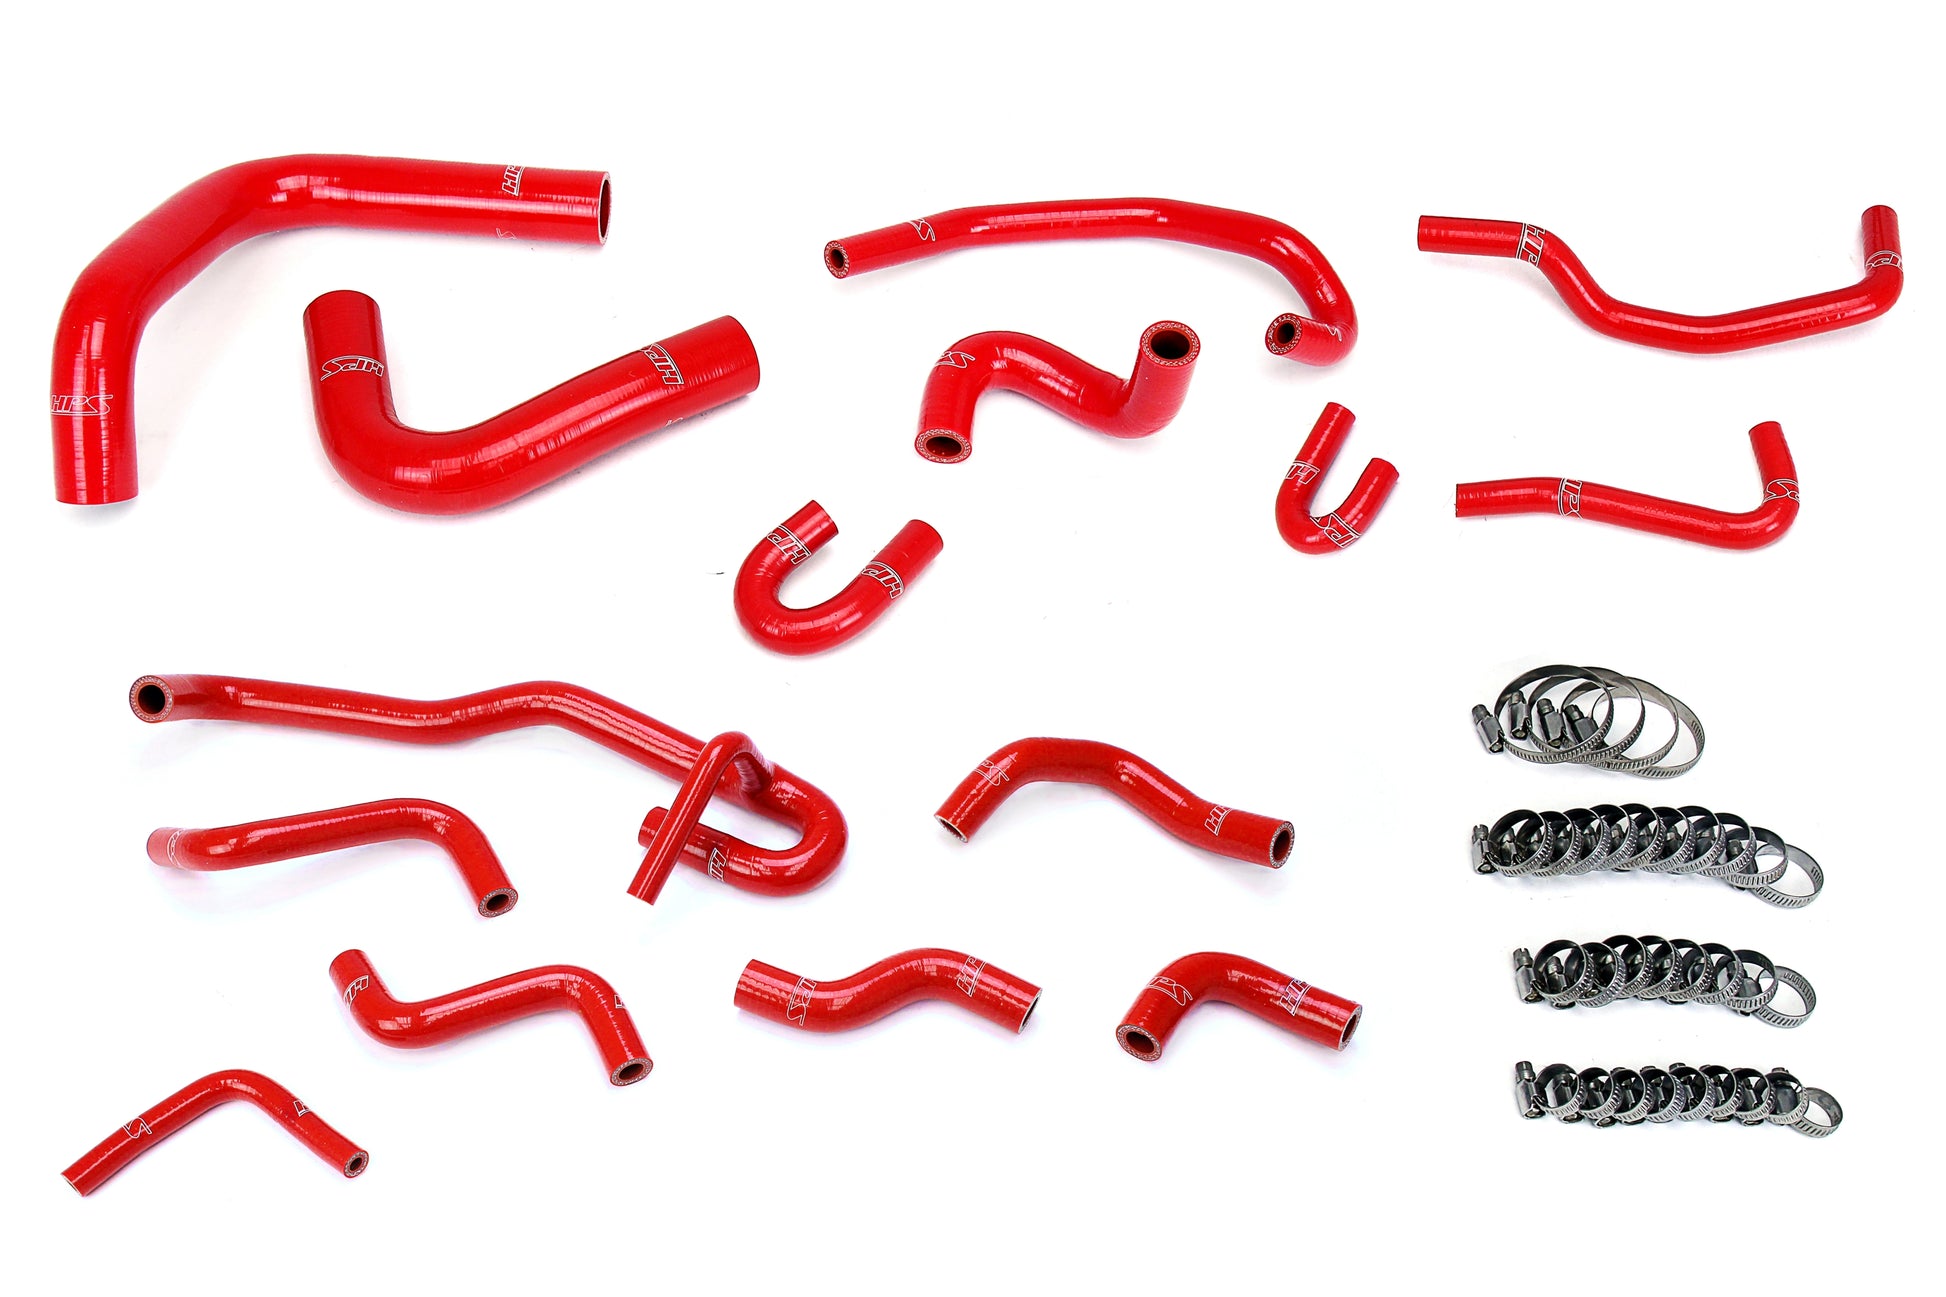 HPS Silicone Radiator and heater hoses 1990-1991 Toyota 4Runner 3.0L V6 with Rear Heater Left Hand Drive